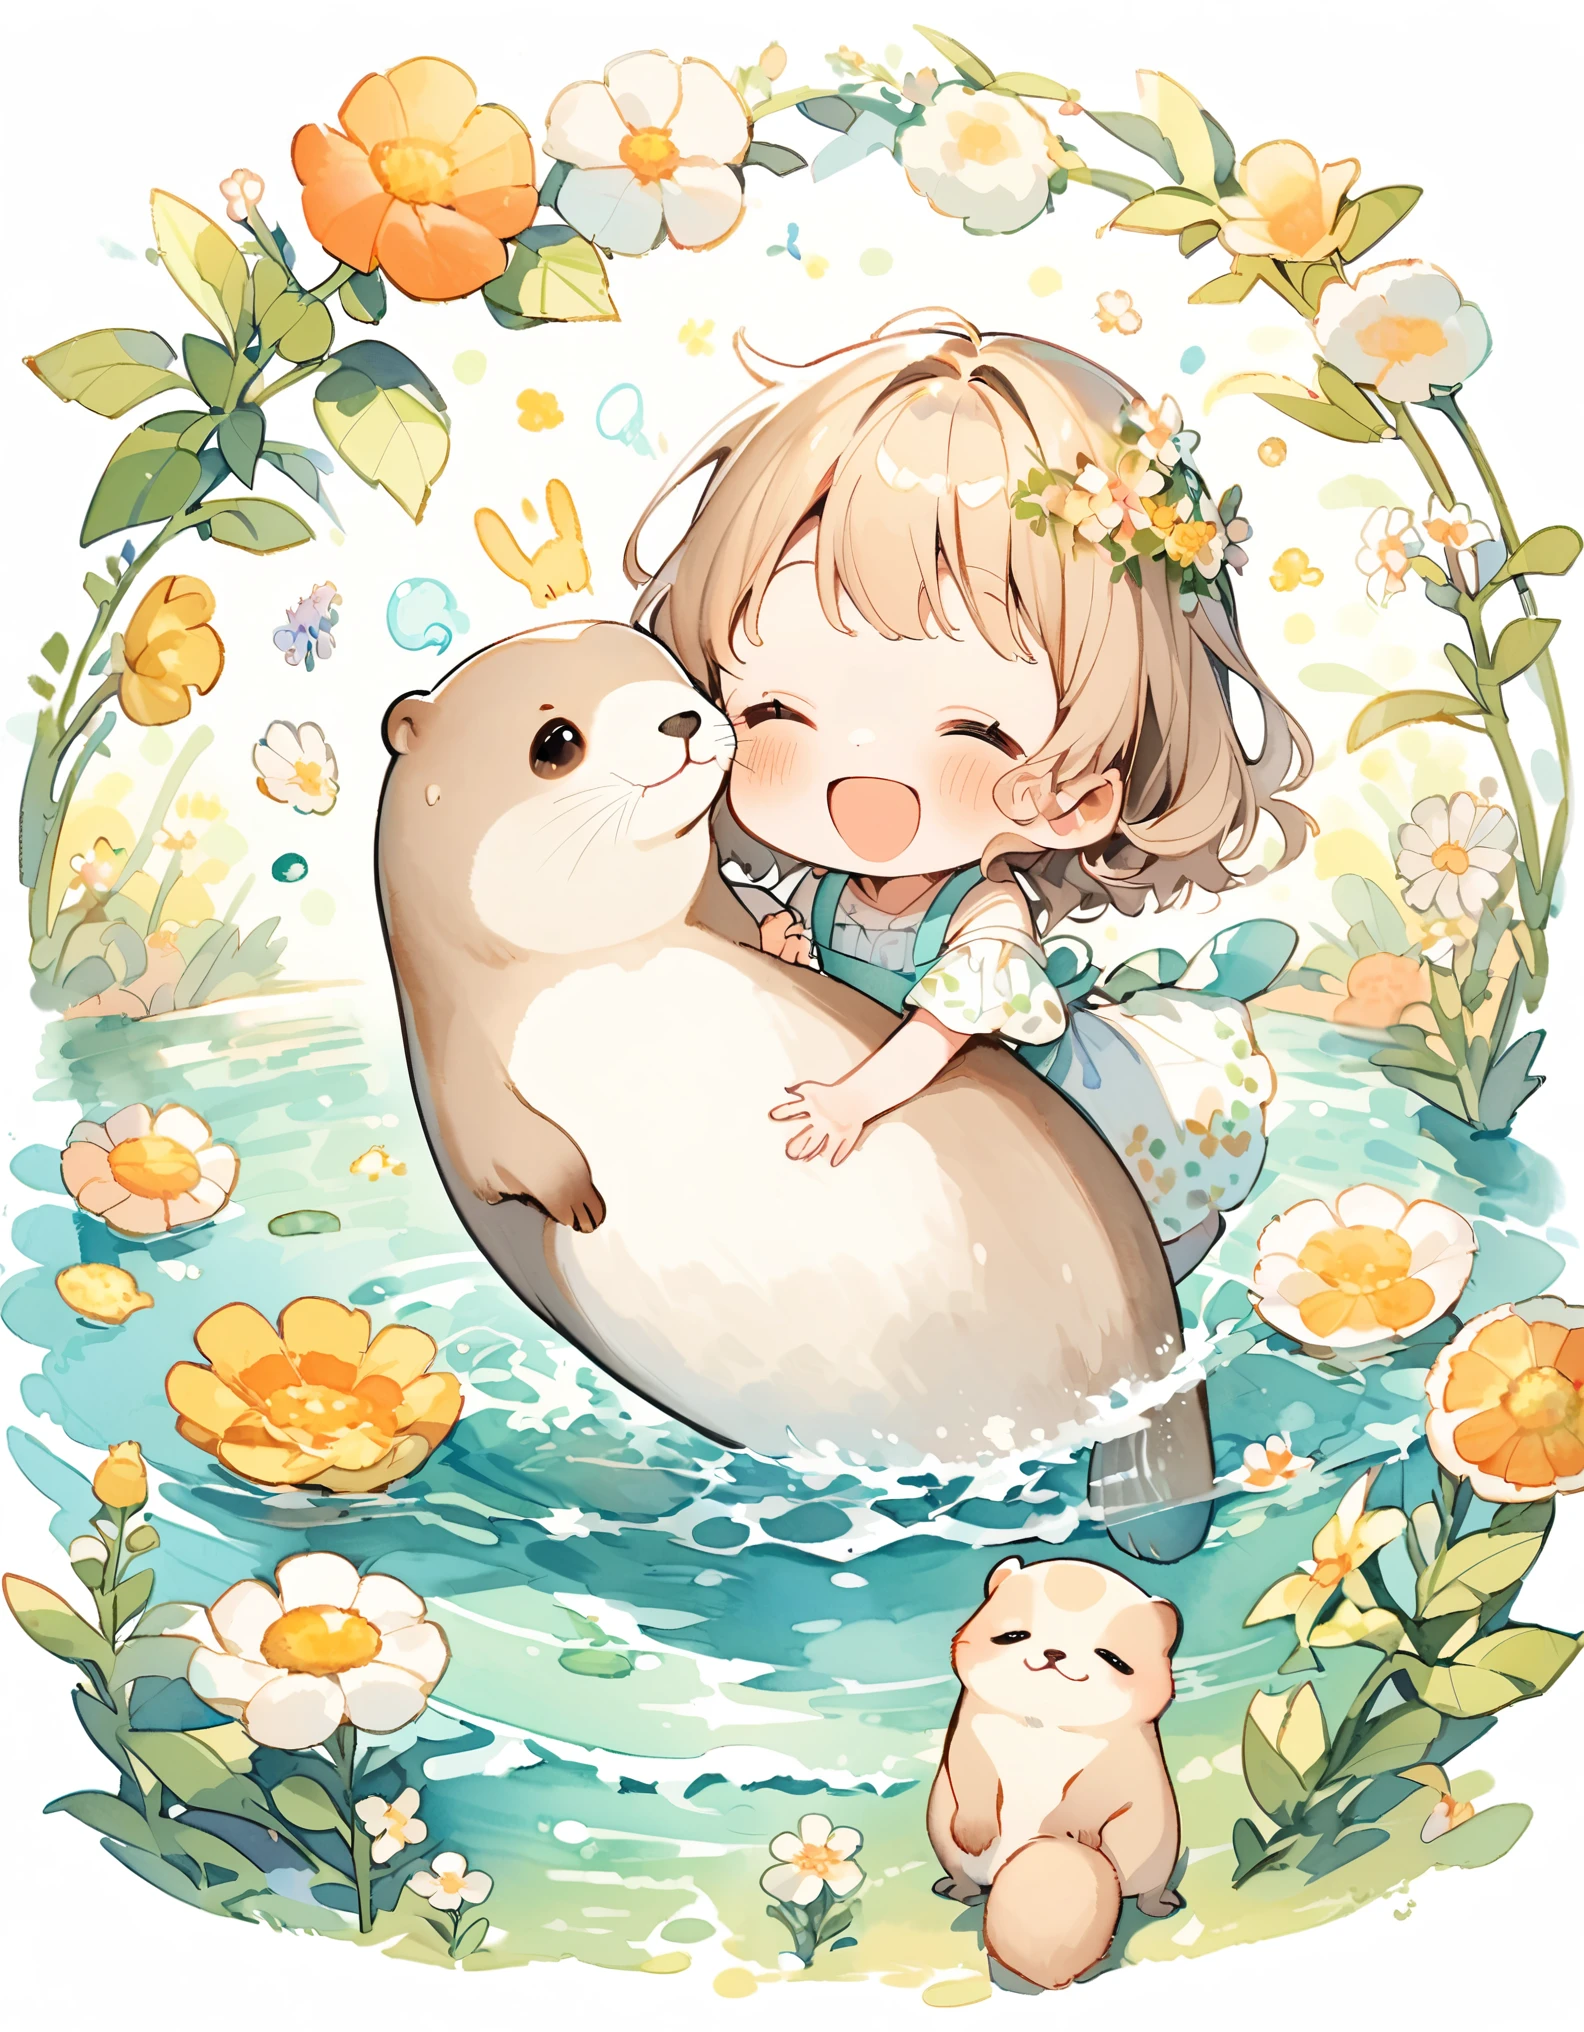 Otter, 1匹のコツメOtter,((Playing by the water)), wood々and flowers々, content:Watercolor. style:Whimsical and delicate, Like an illustration in a children&#39;s book.